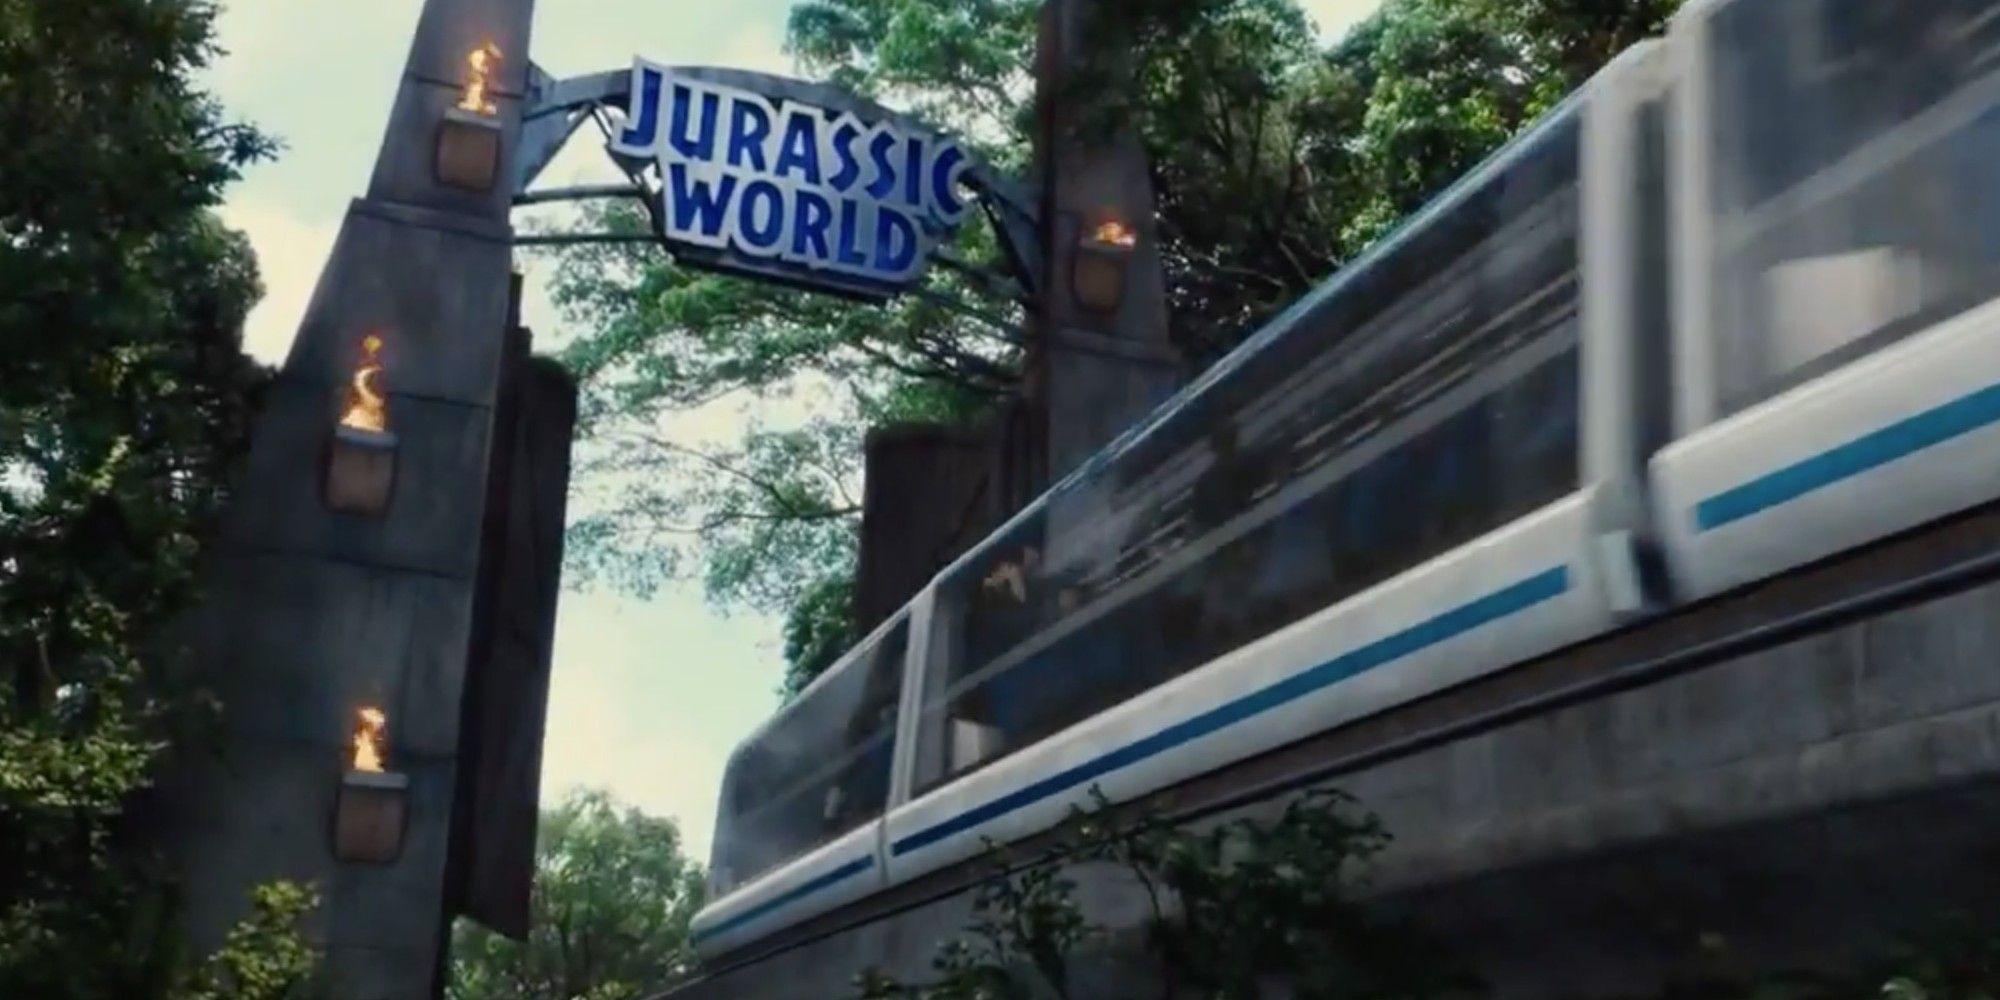 The train goes through the gate in Jurassic World